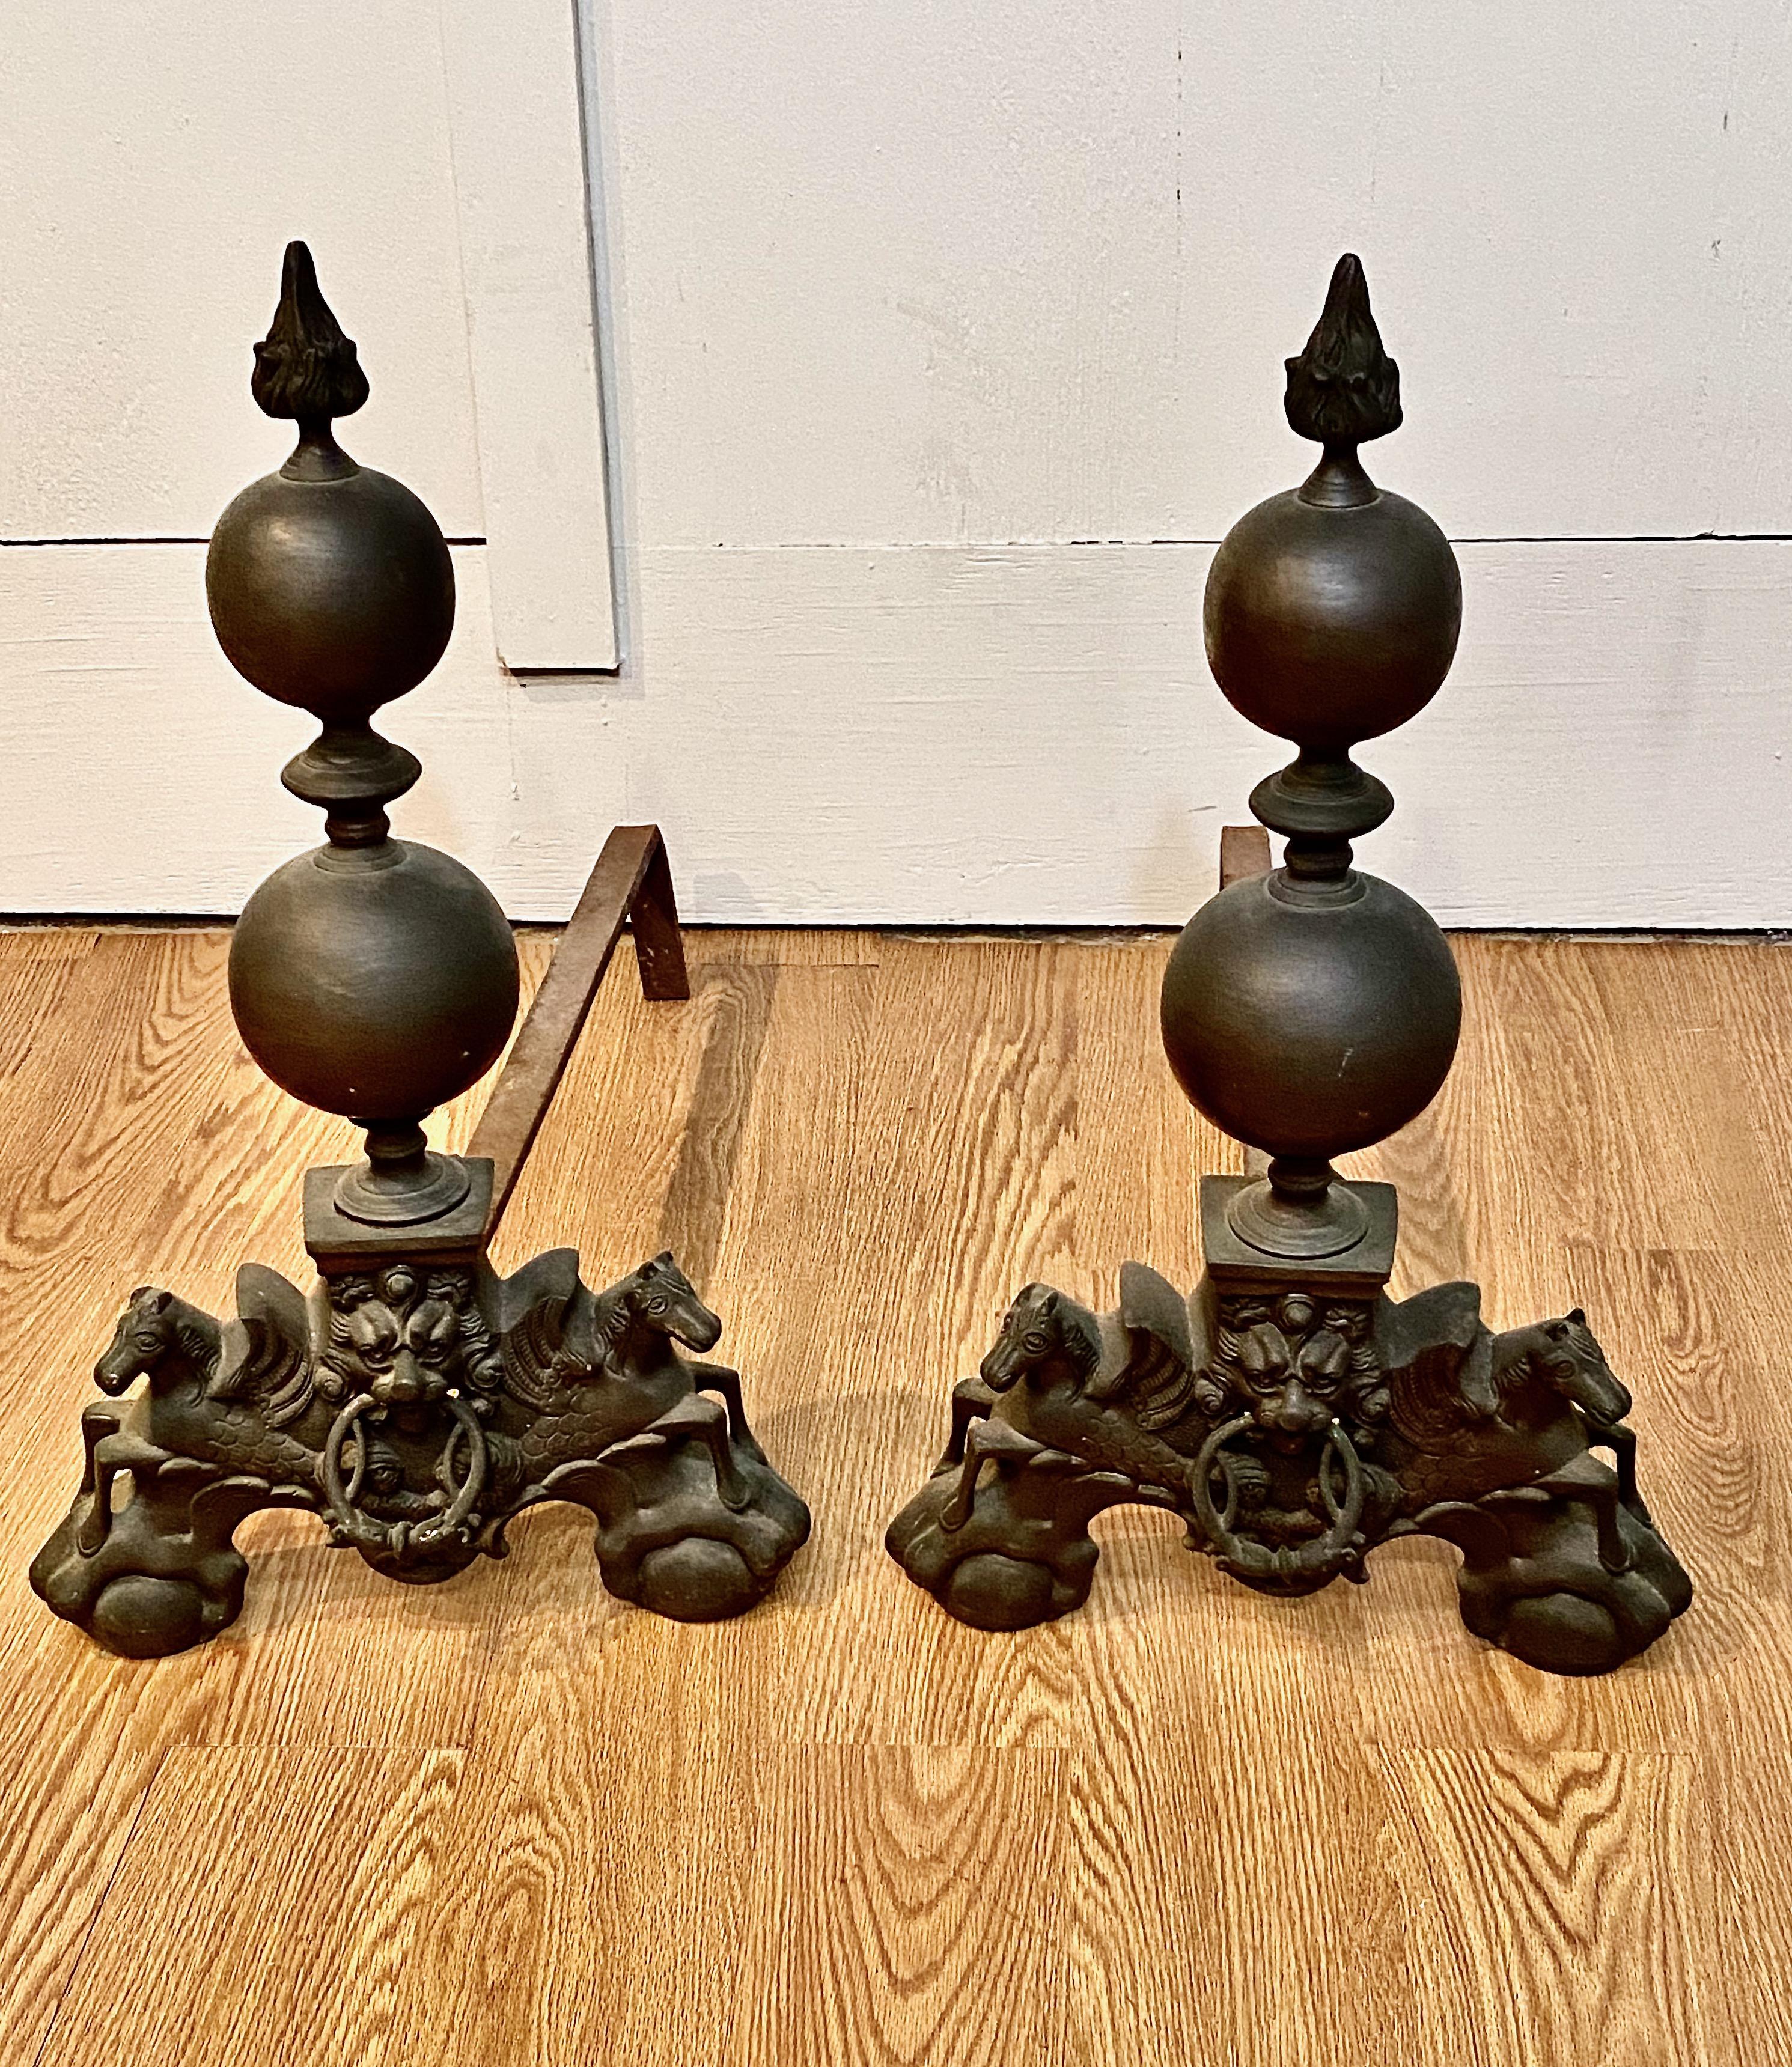 This is a superb pair of mid-19th century French bronze andirons in the Baroque Louis XIV taste. These guys have a wonderful hefty presence and could be fitted to Spanish, Italian, Dutch or Colonial inspired fire places. In addition to the horses